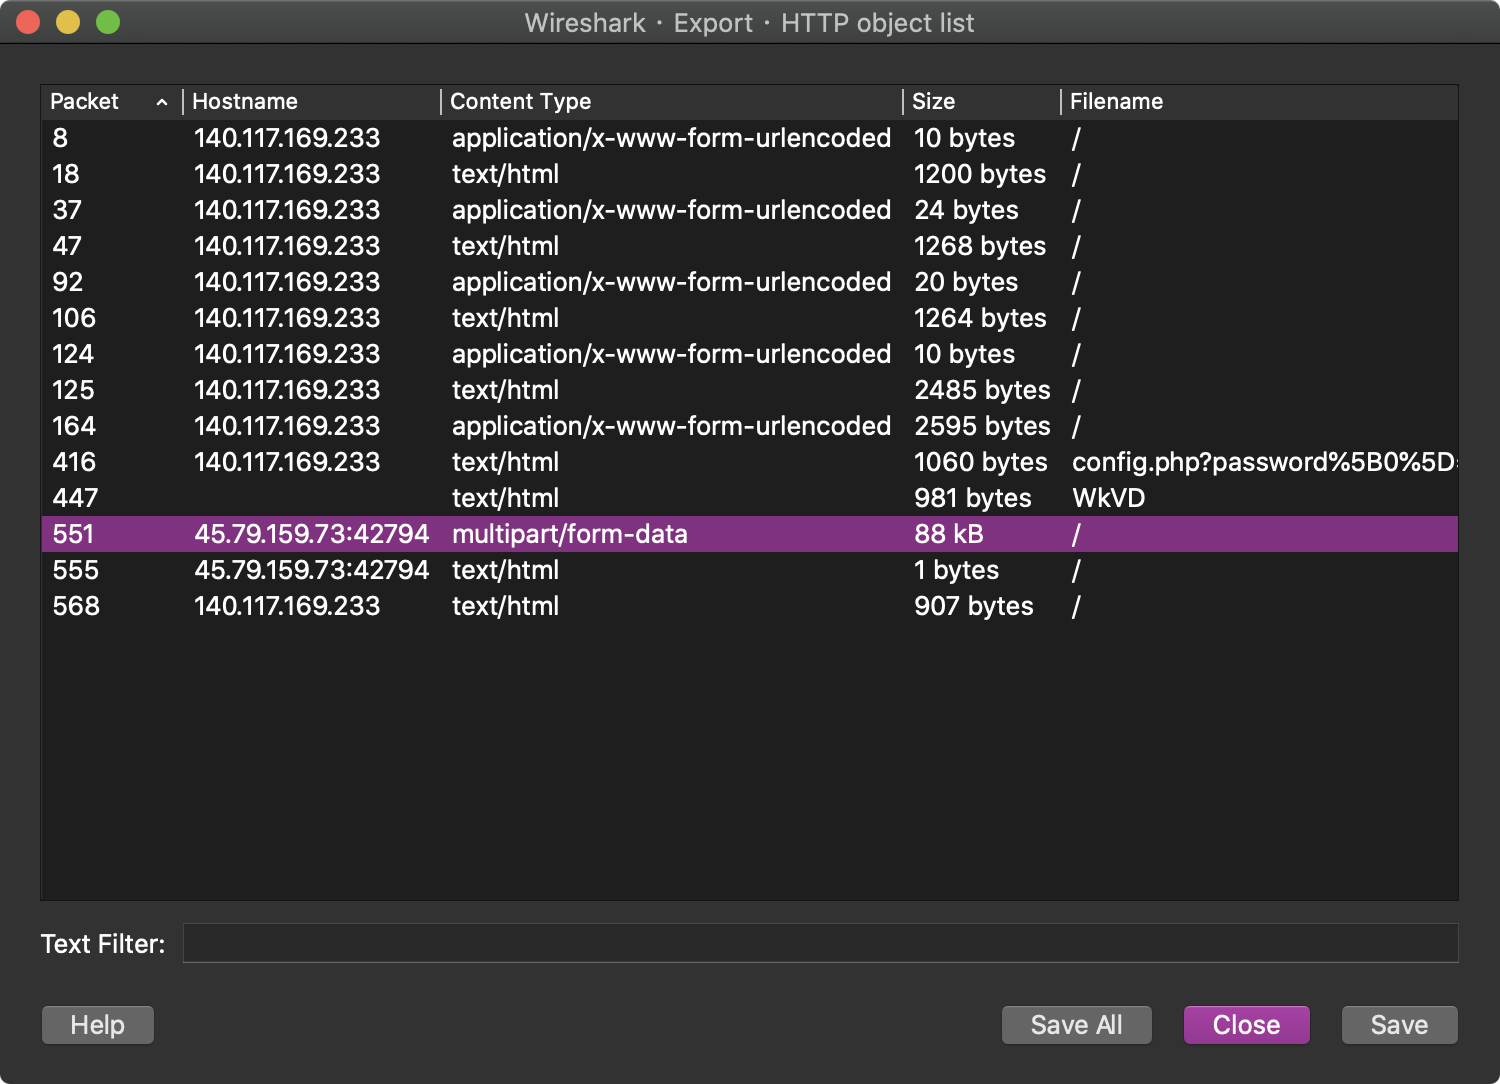  wireshark-exports_object_http